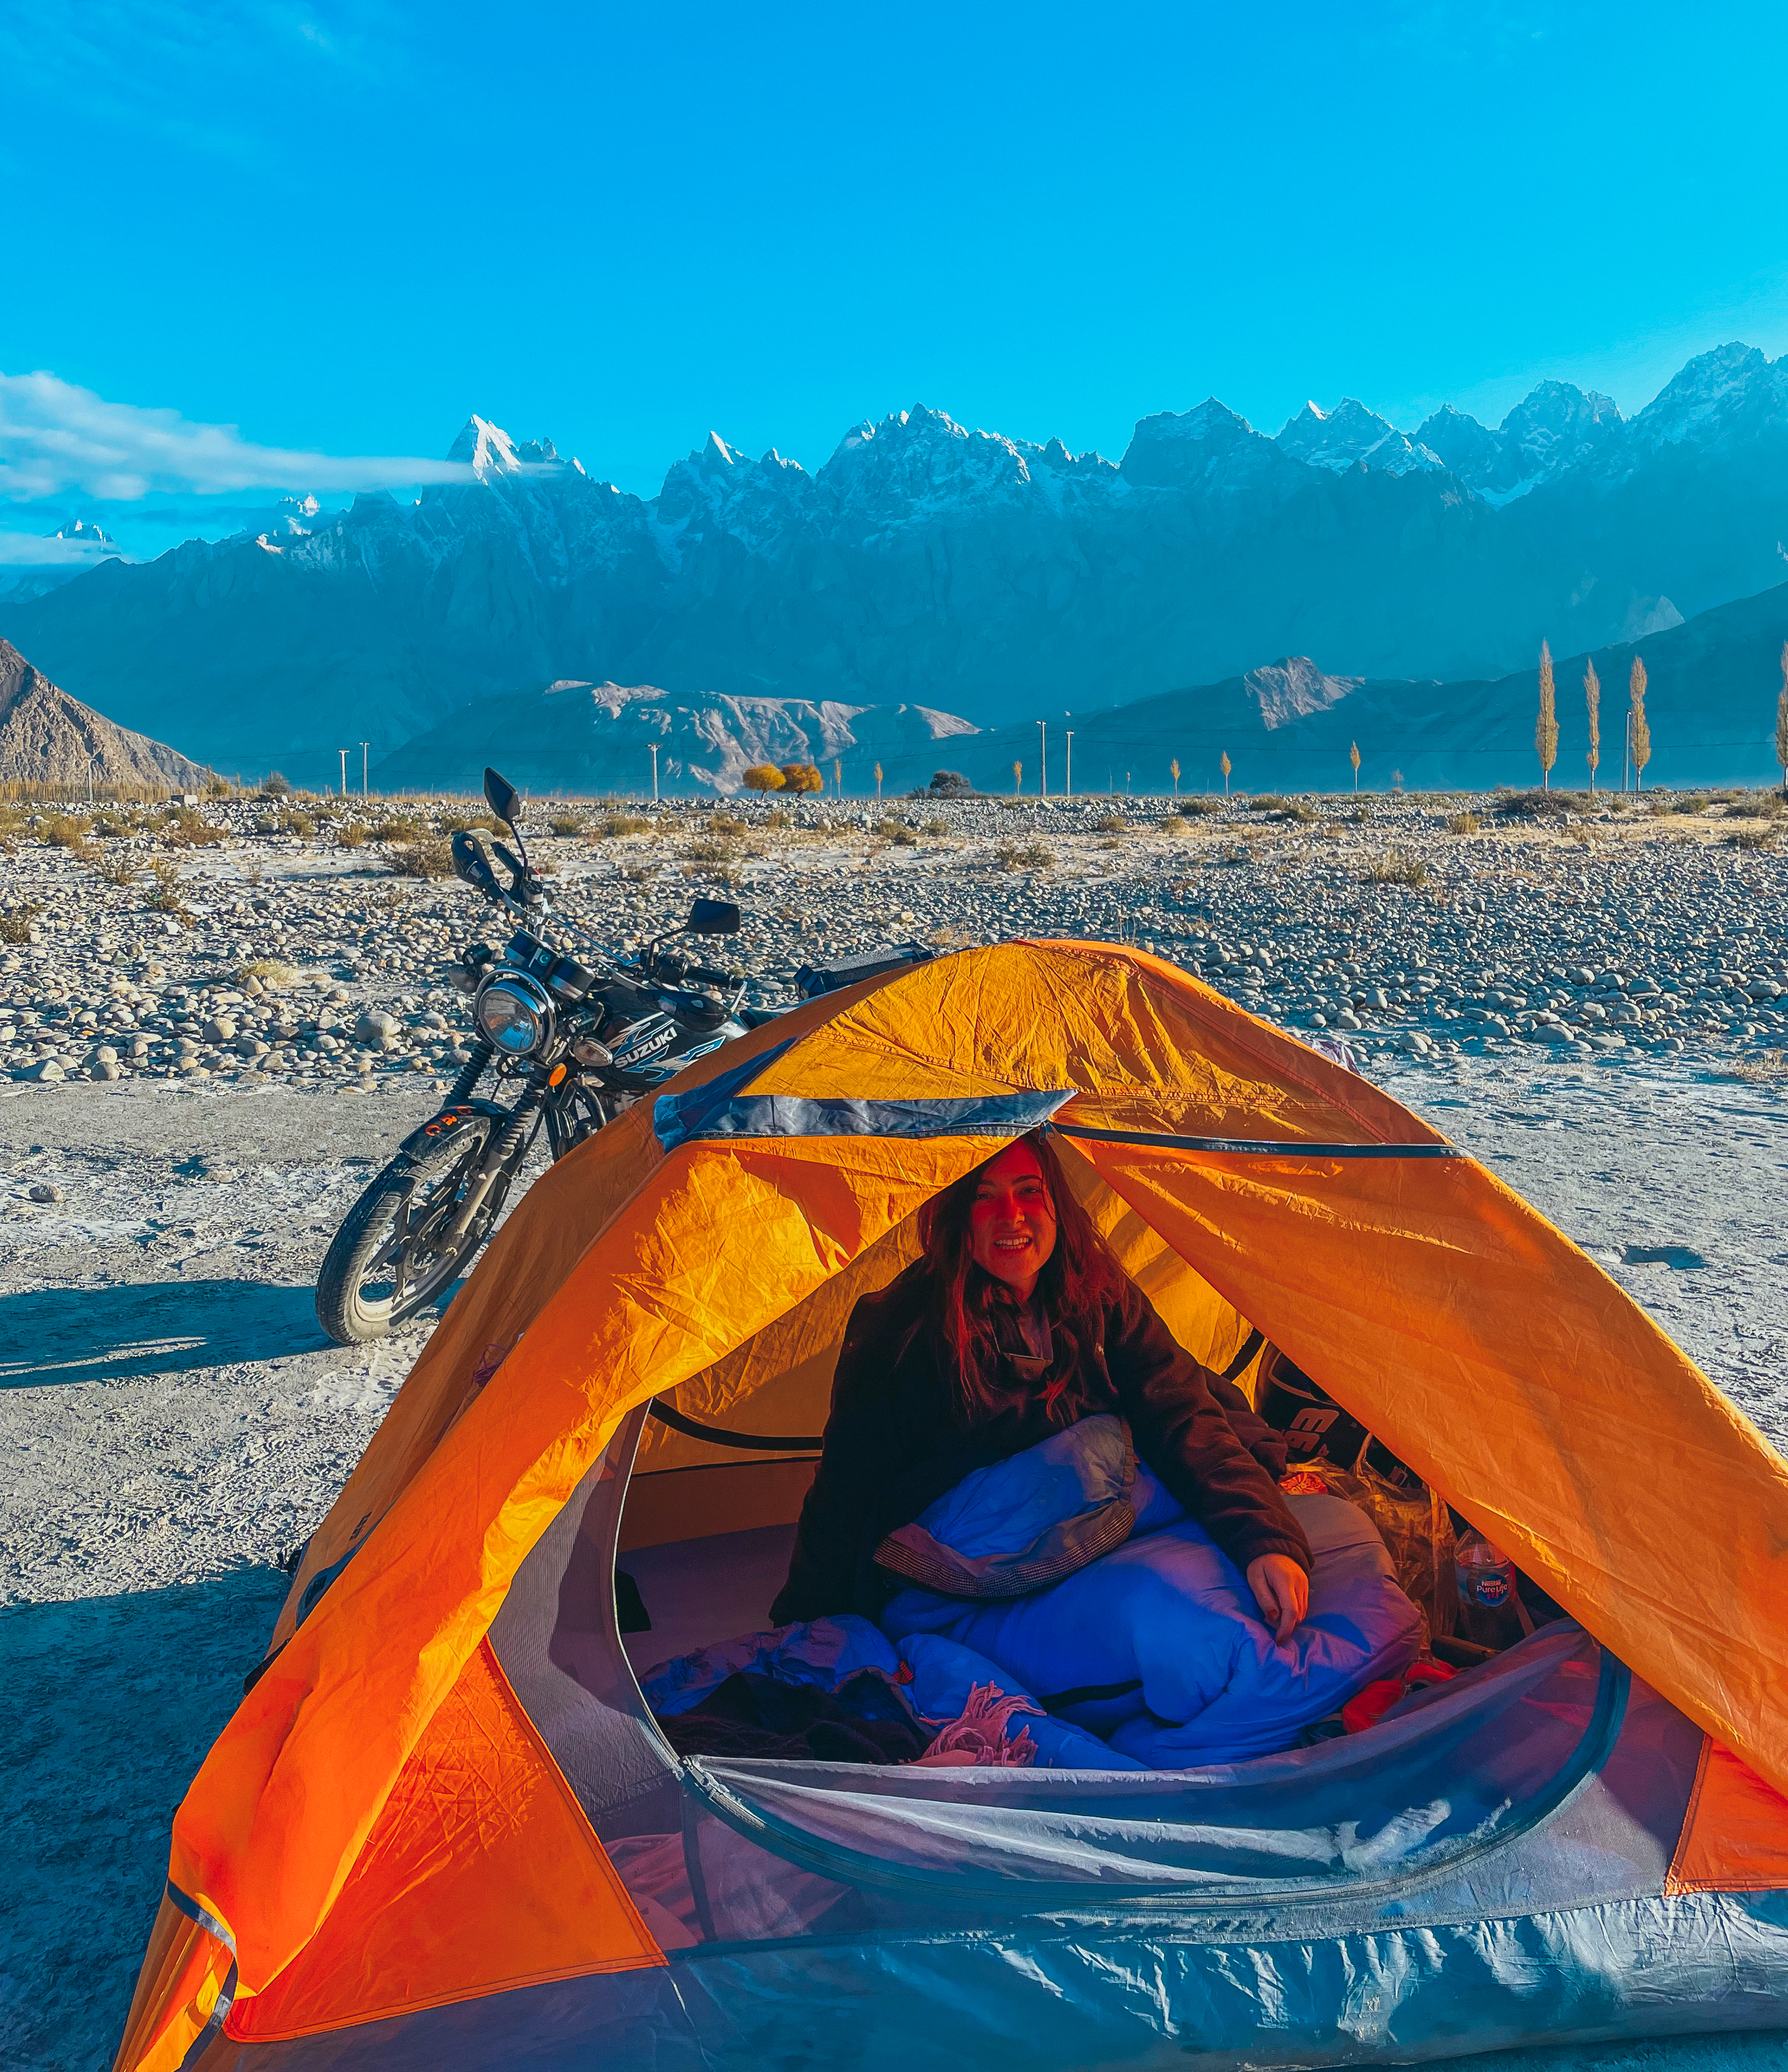 Camping on the side of the Indus River in Saling, Pakistan